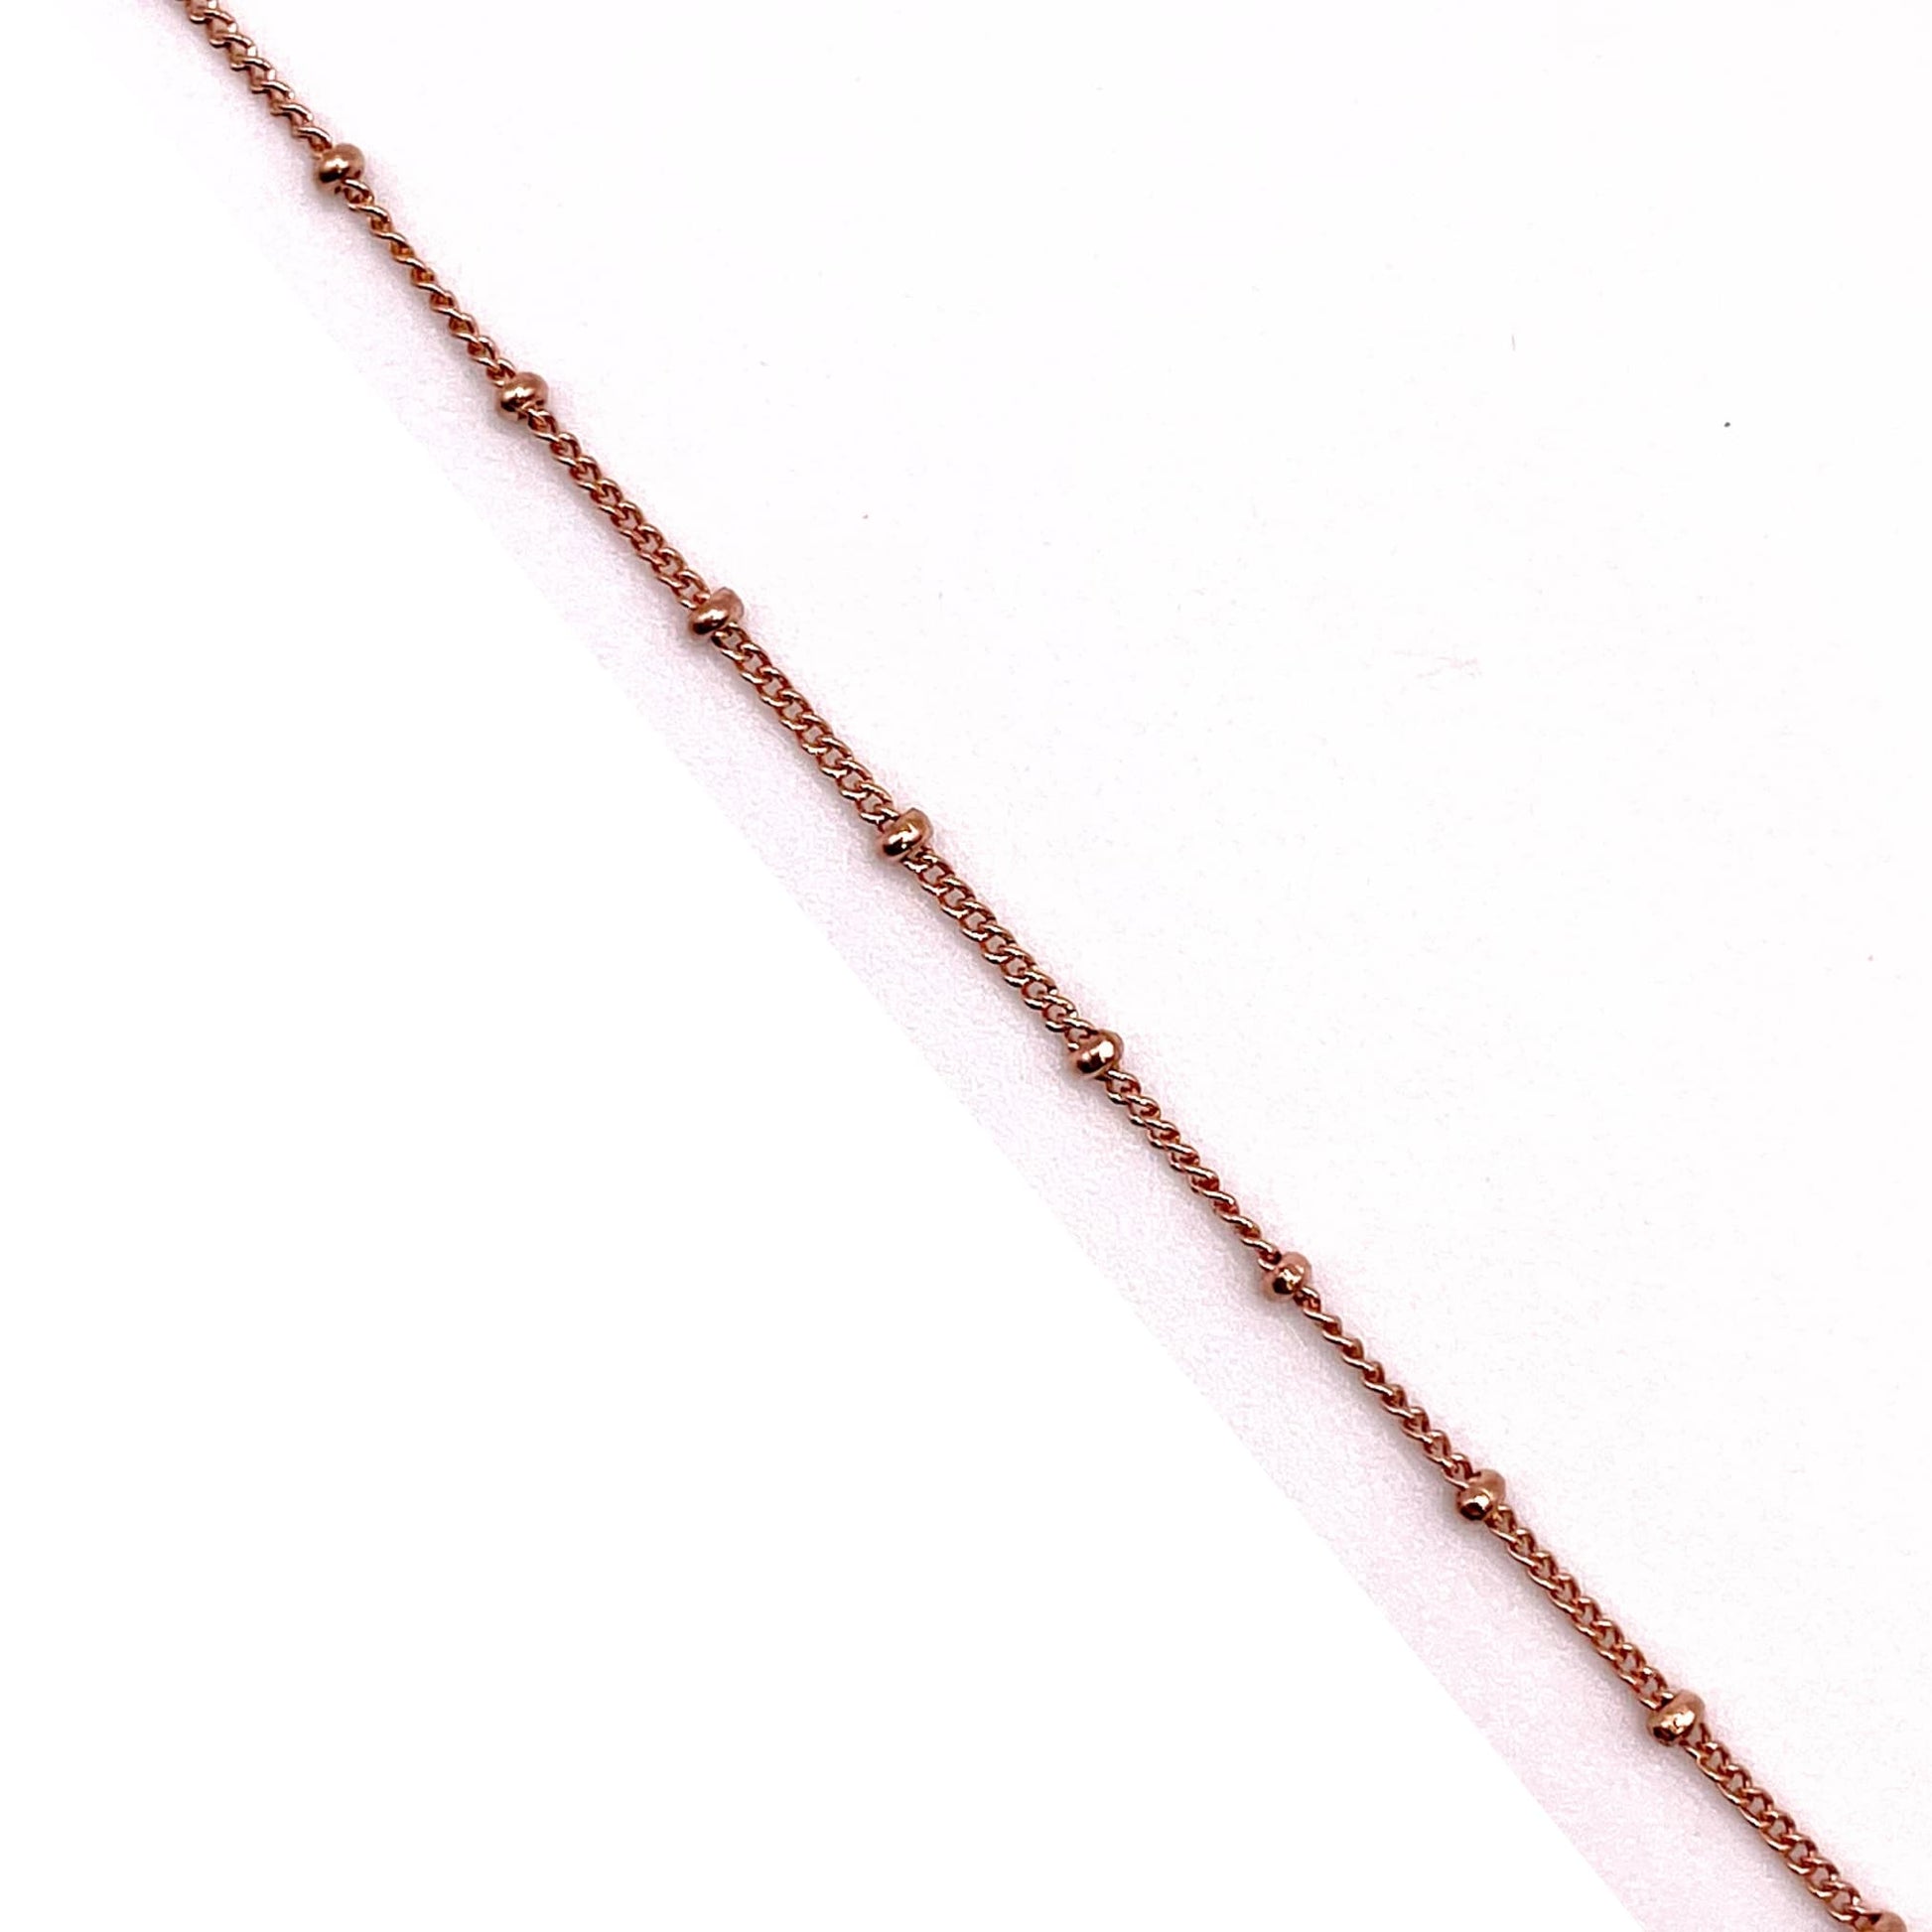 14k rose gold filled satellite chain in white background.